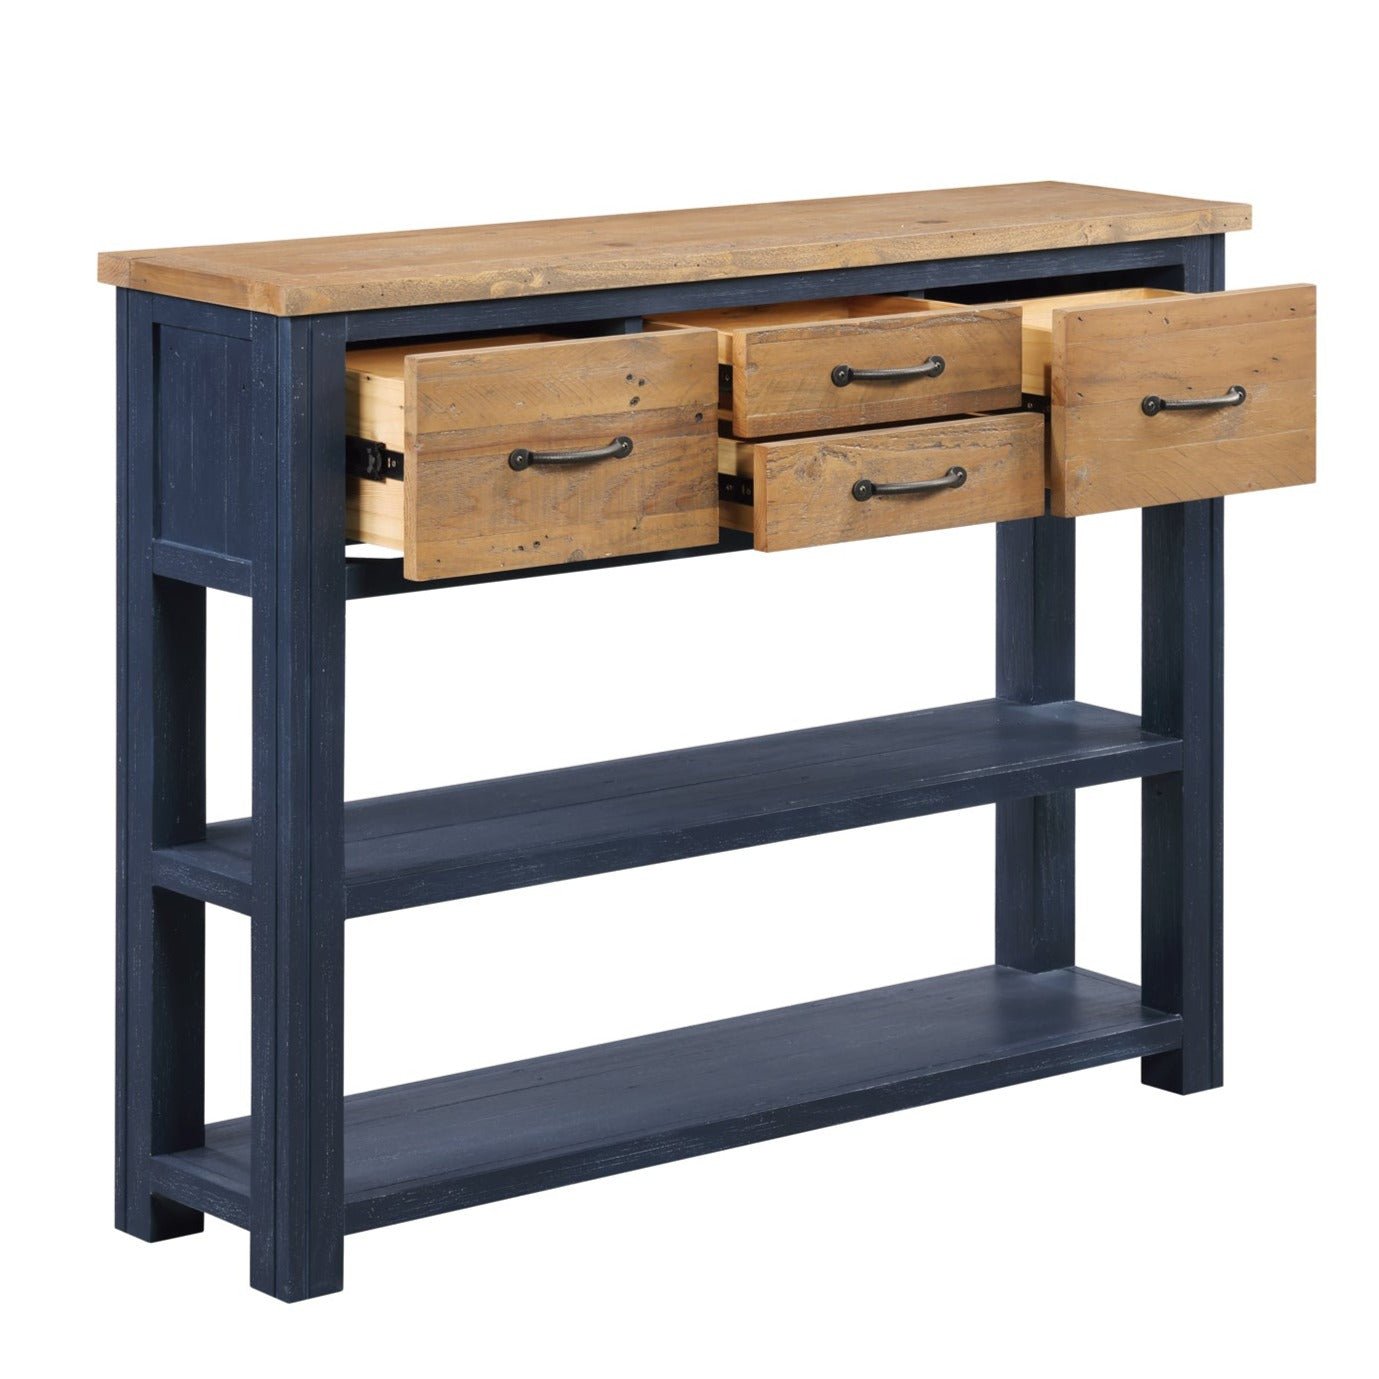 Splash of Blue Console Table with Storage - Duck Barn Interiors